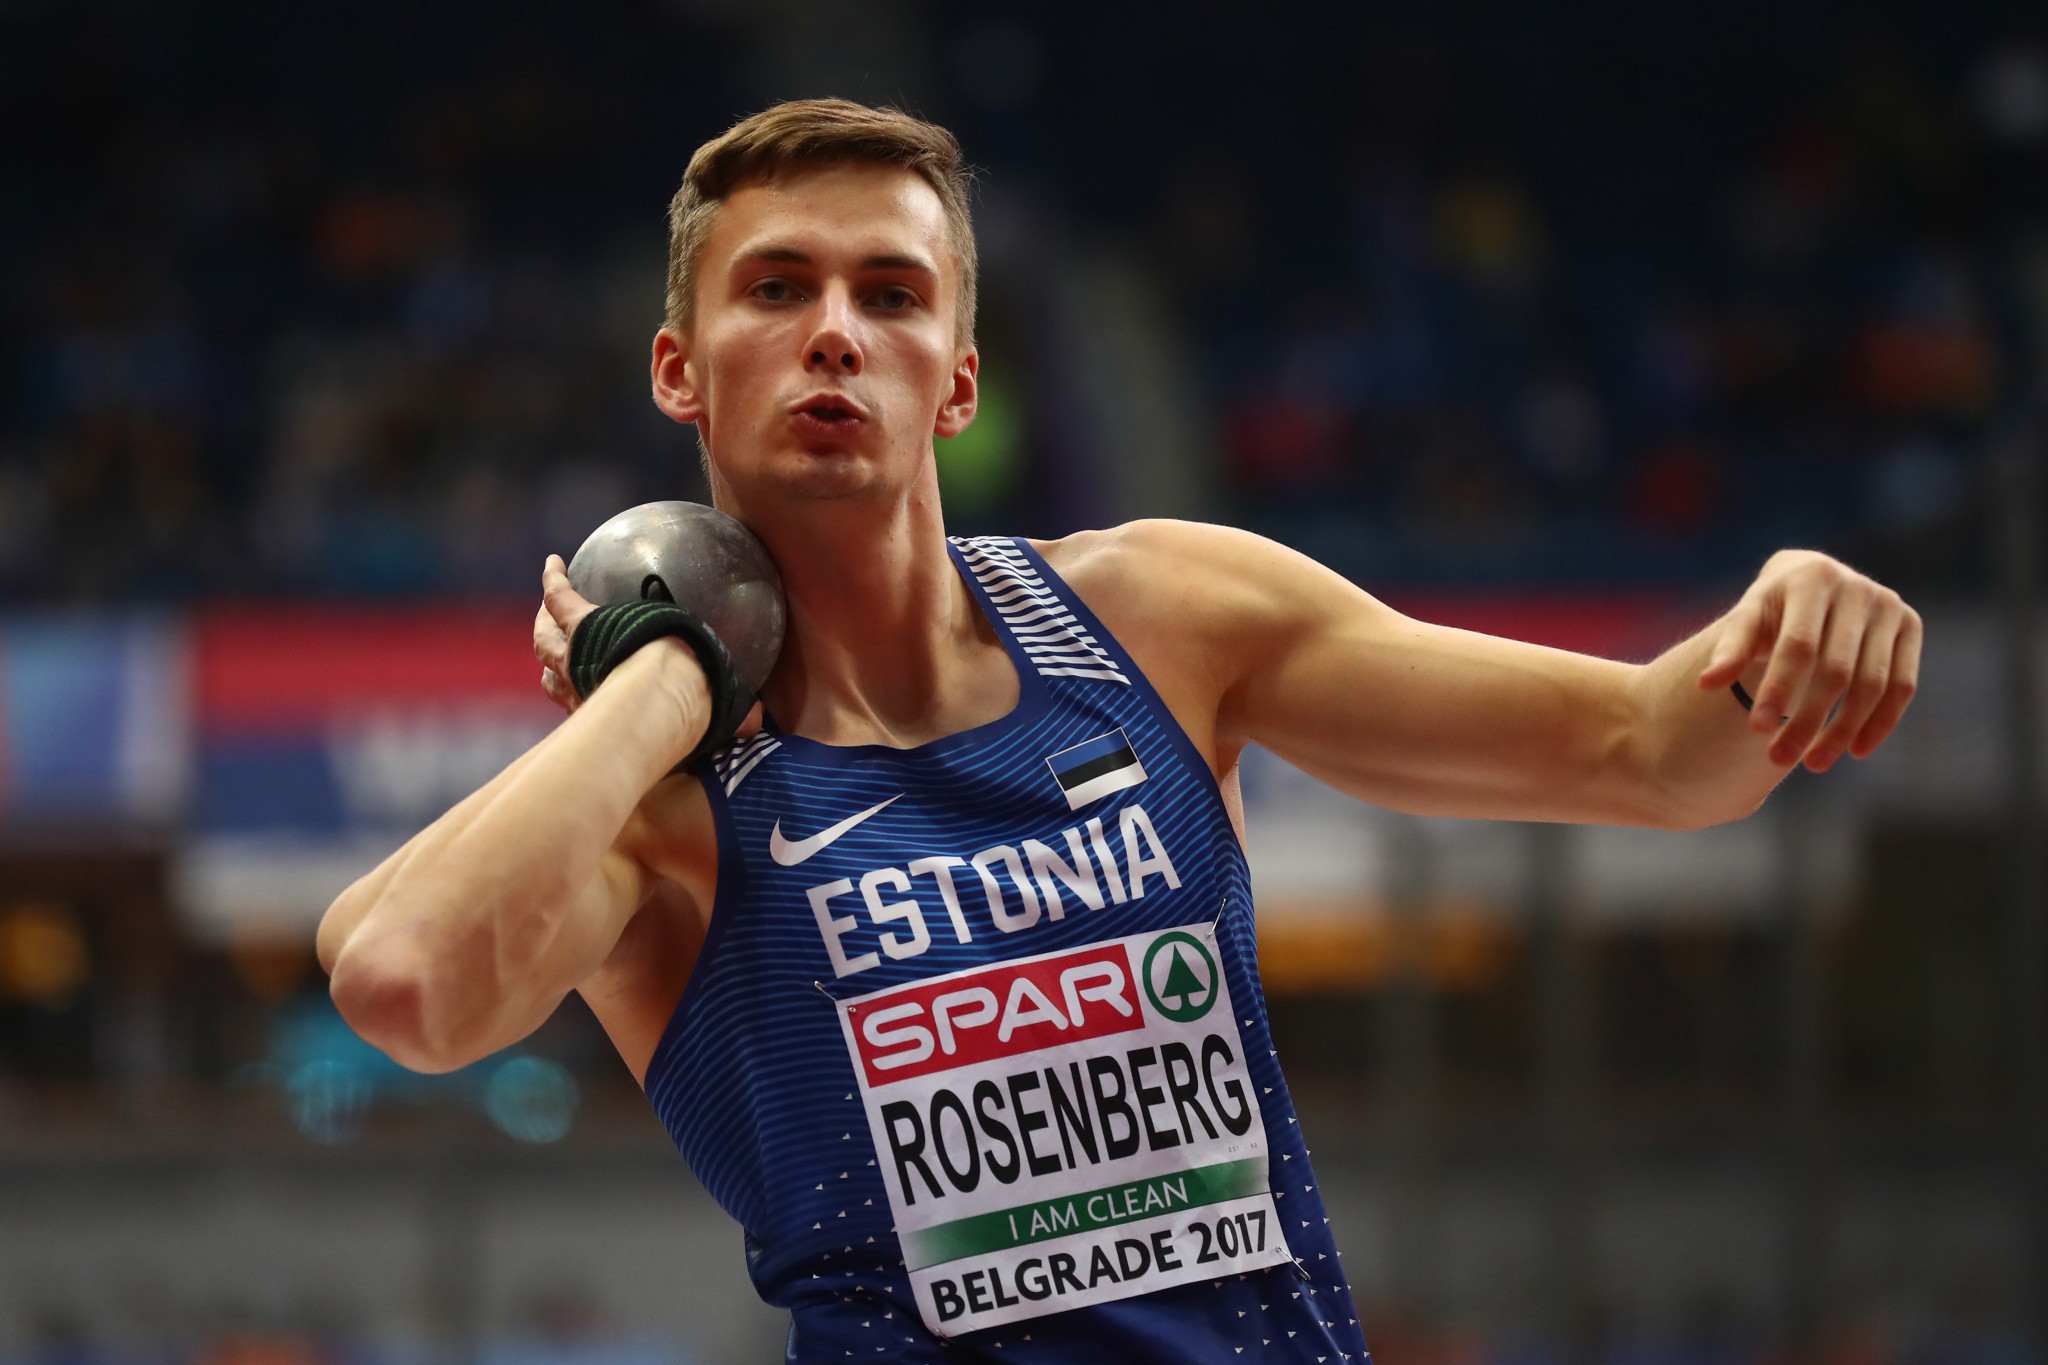 Rosenberg and Kunz lead at halfway stage after first day at IAAF Combined Events Challenge